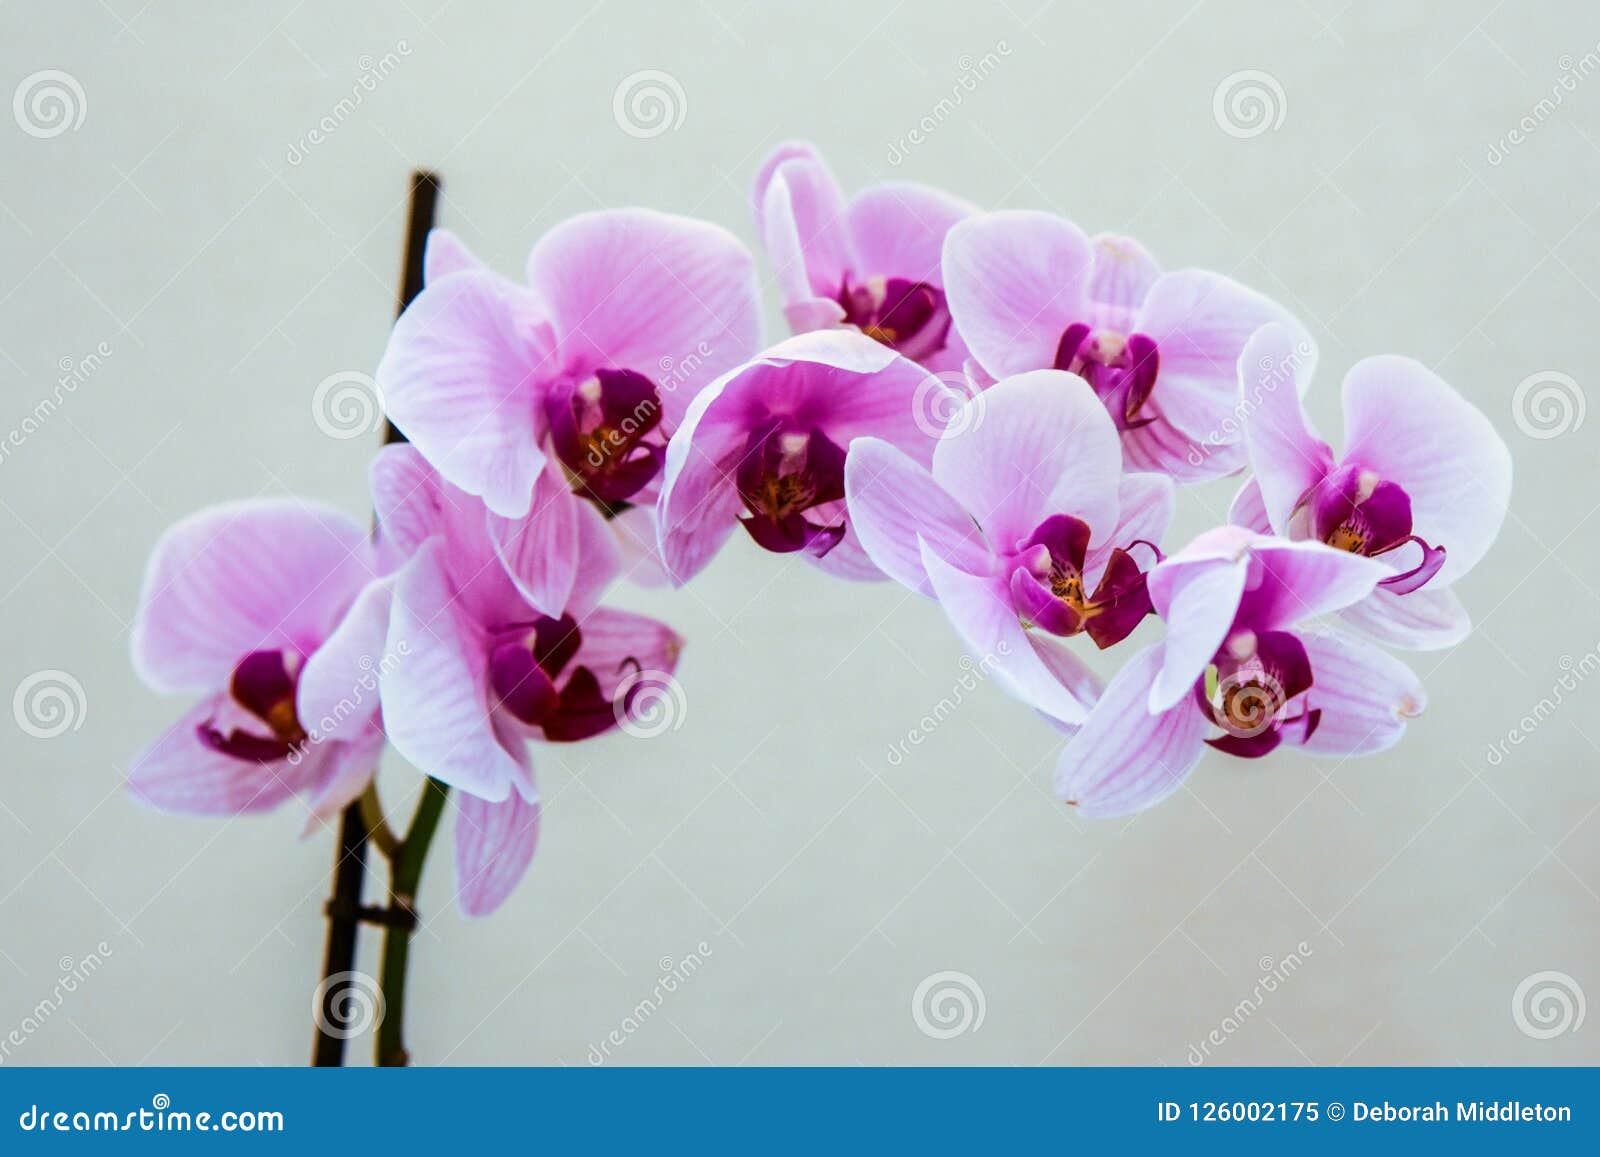 Beautiful Magenta Orchid Flowers Blooming Stock Image Image Of